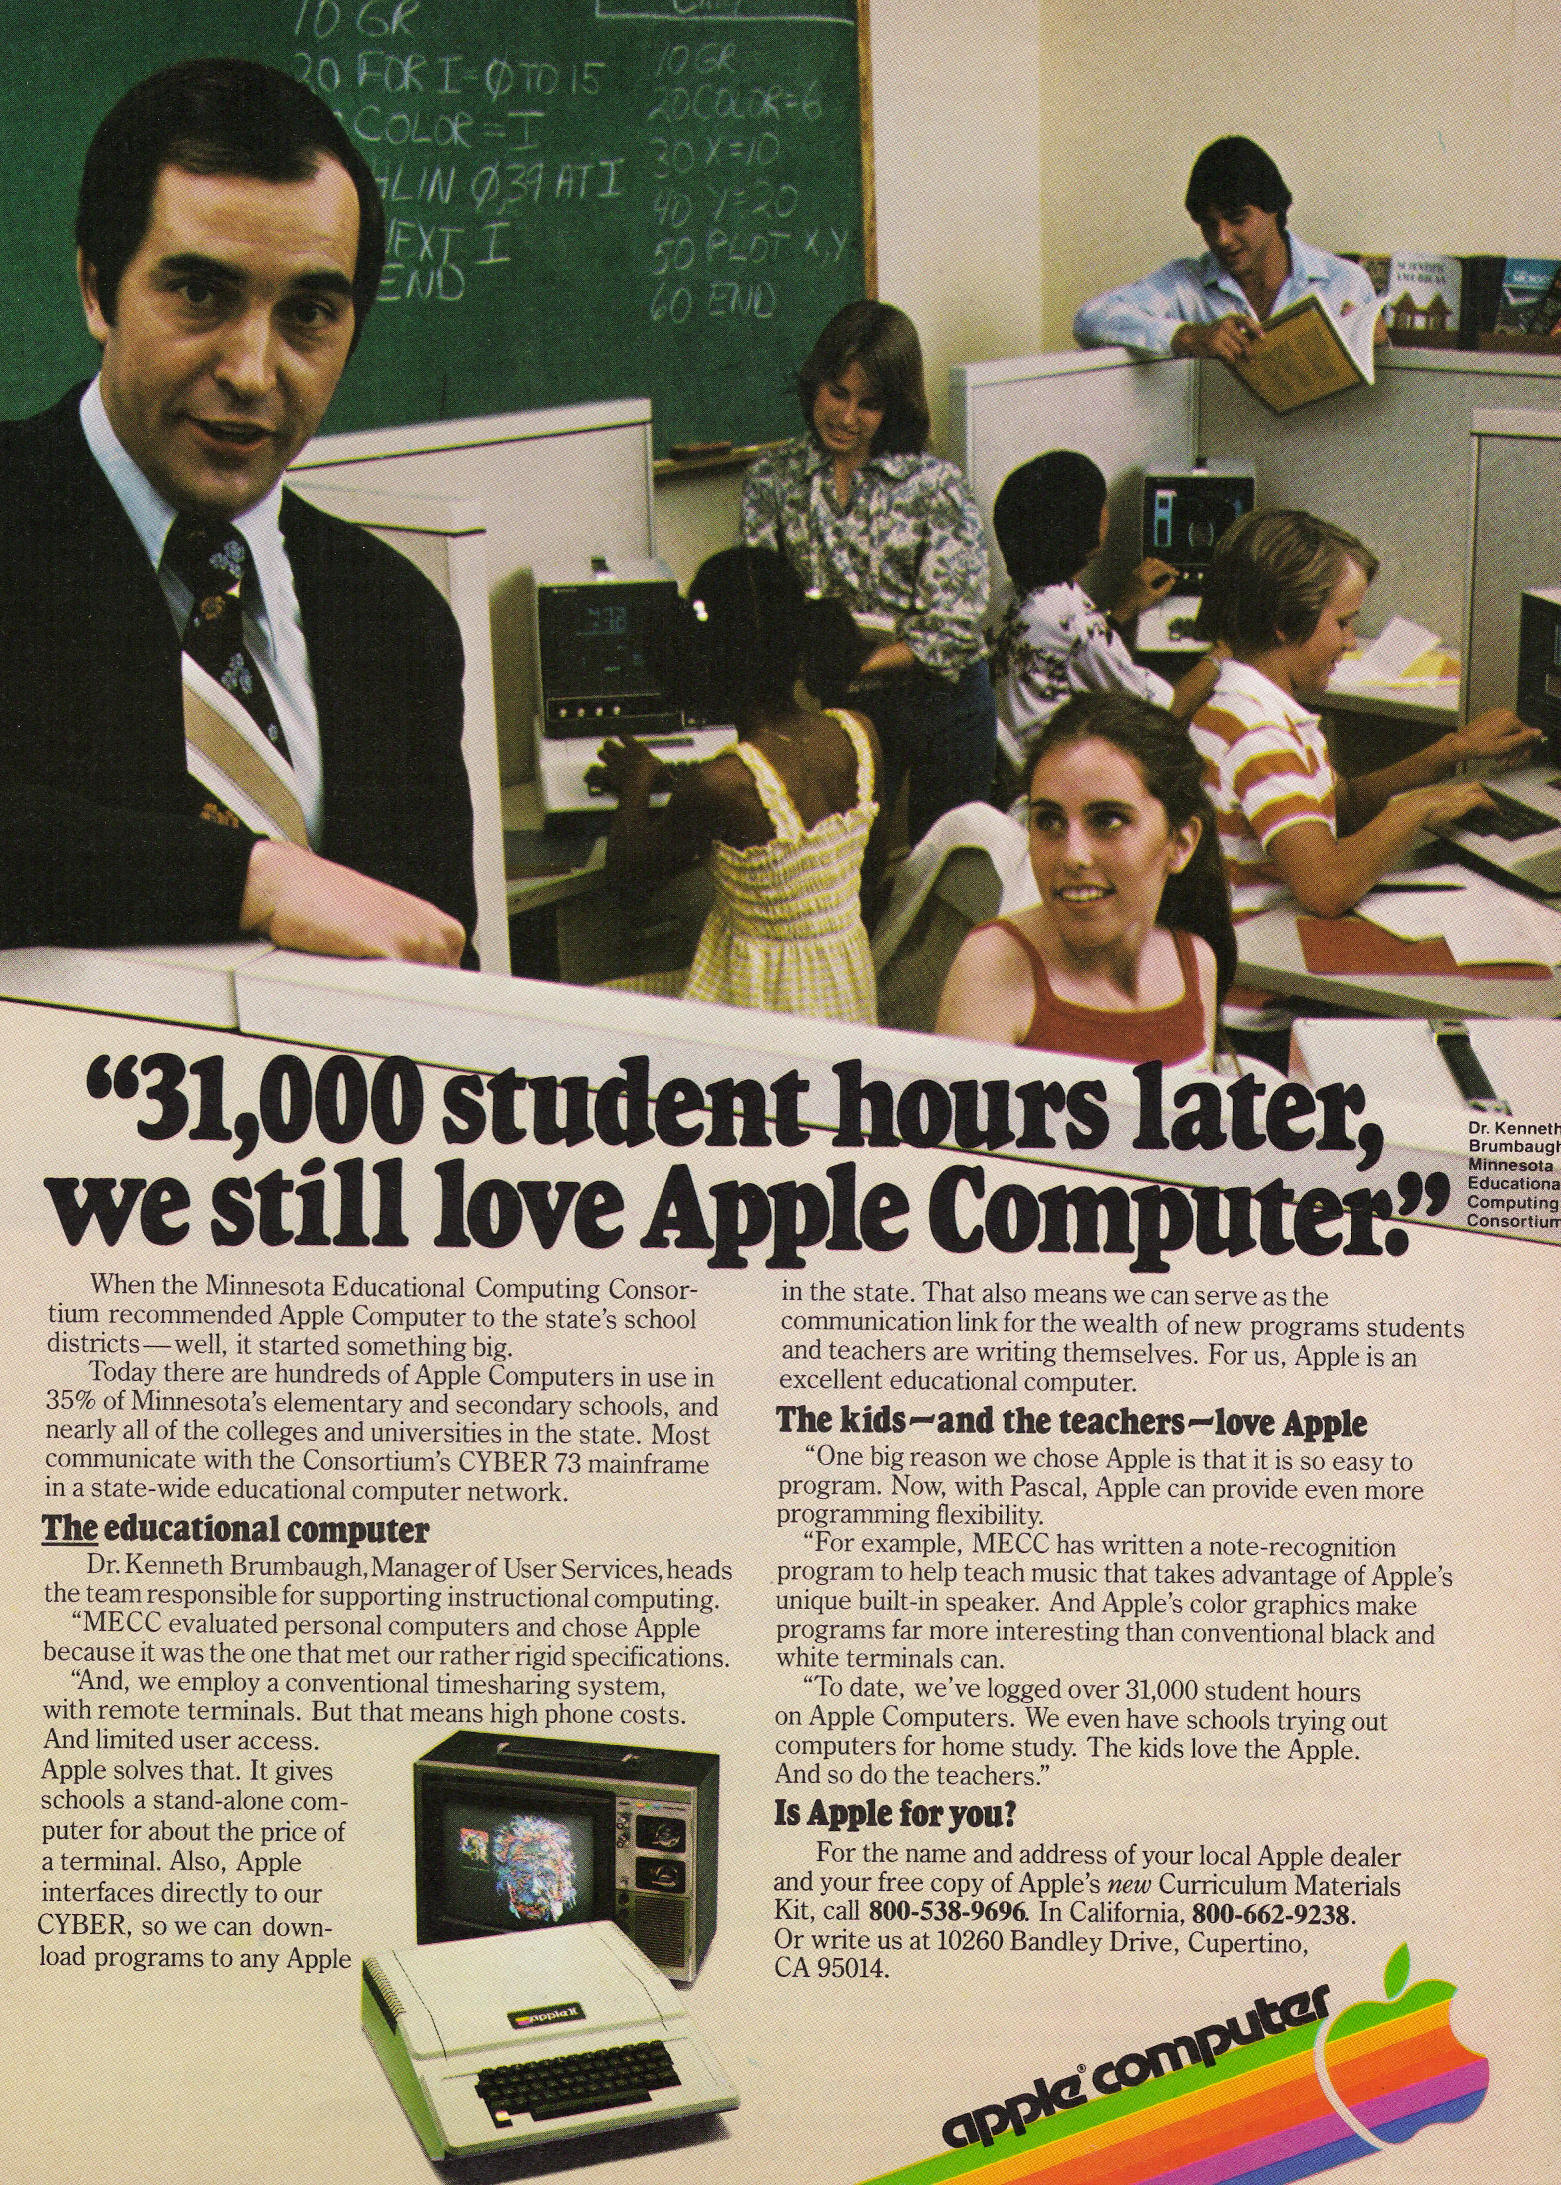 vintage computer ads - Computer - Voor O Fete Coxi Wi Exti Eu 31,000 student hours later, we still love Apple Computer.